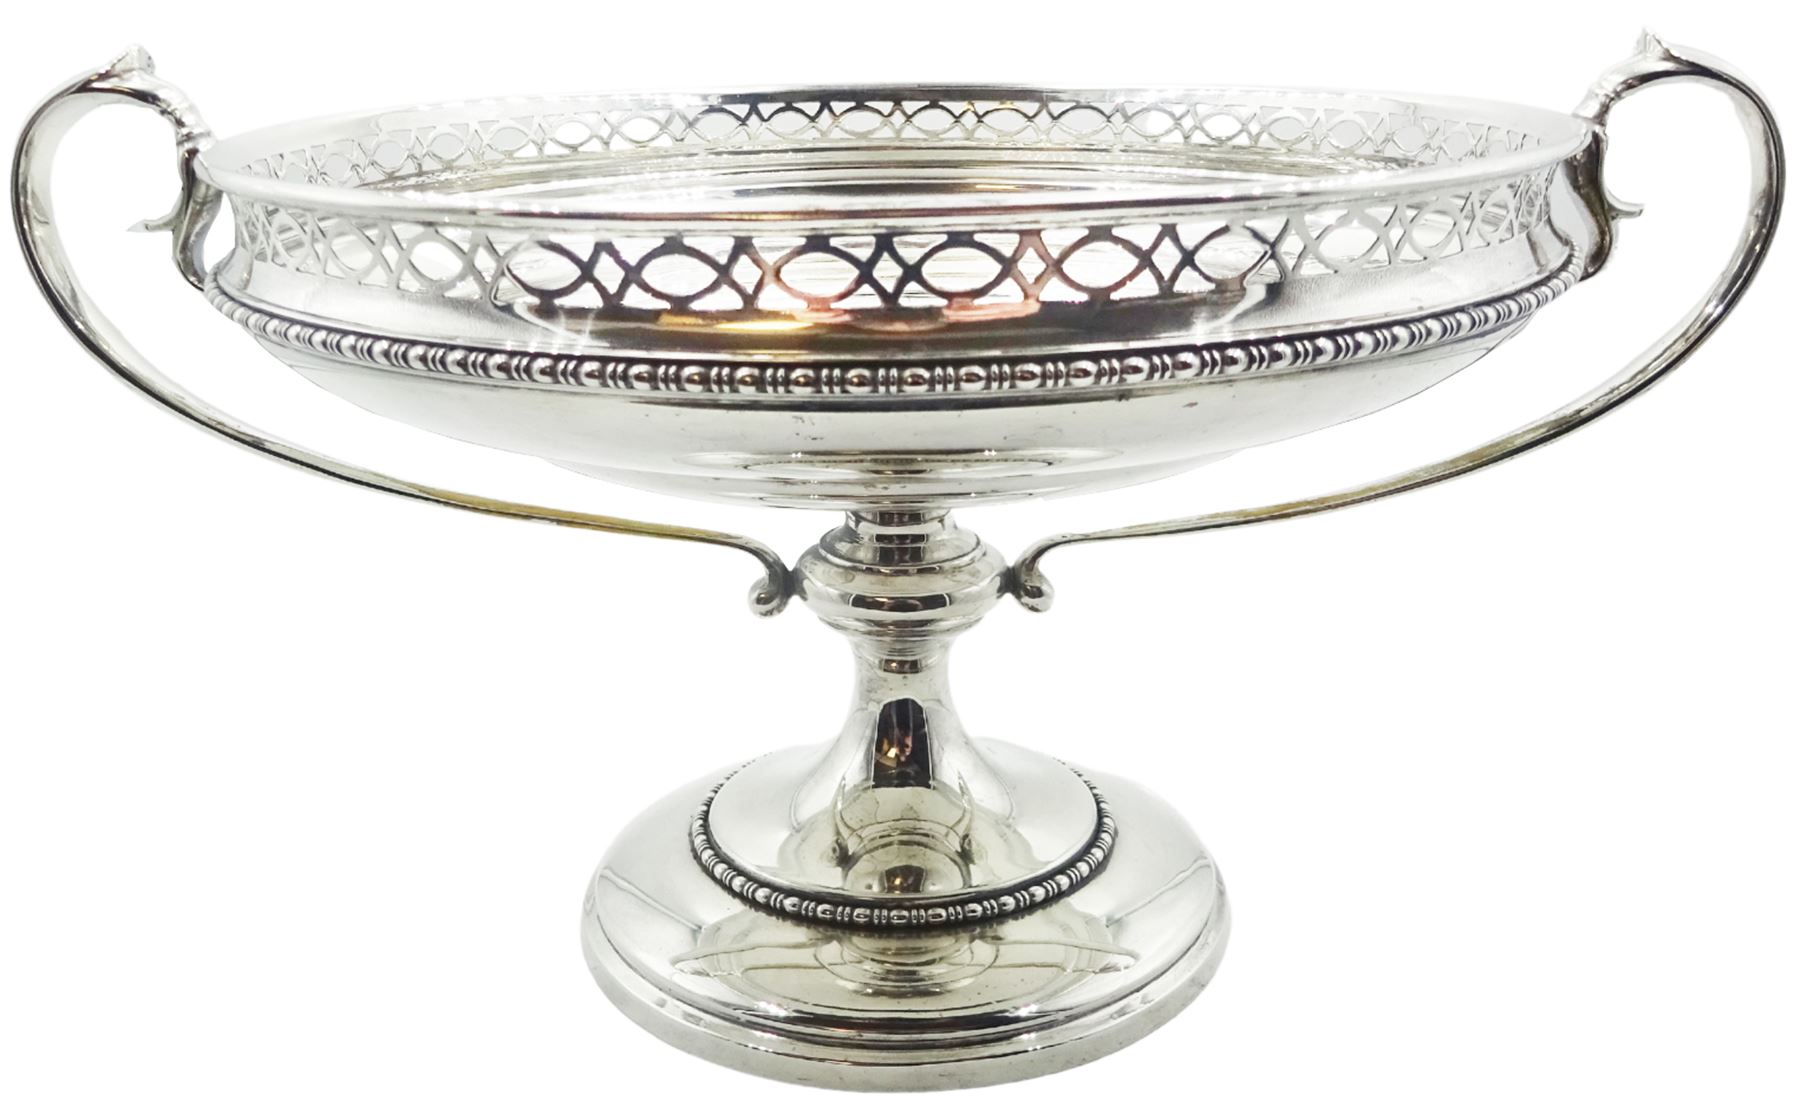 Early 20th century silver twin handled pedestal bowl